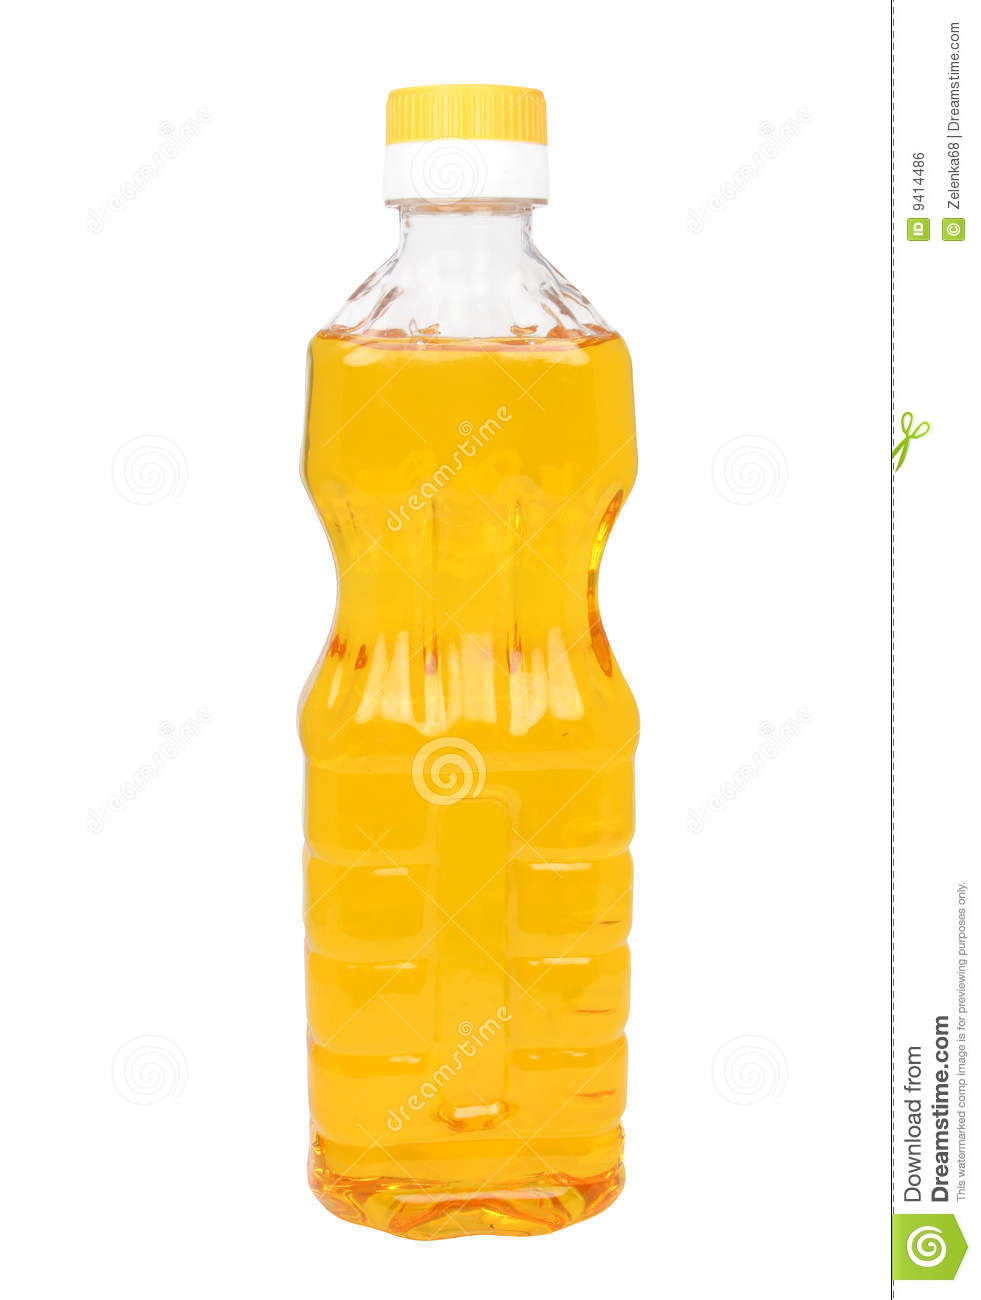 Cooking oil bottle clipart.